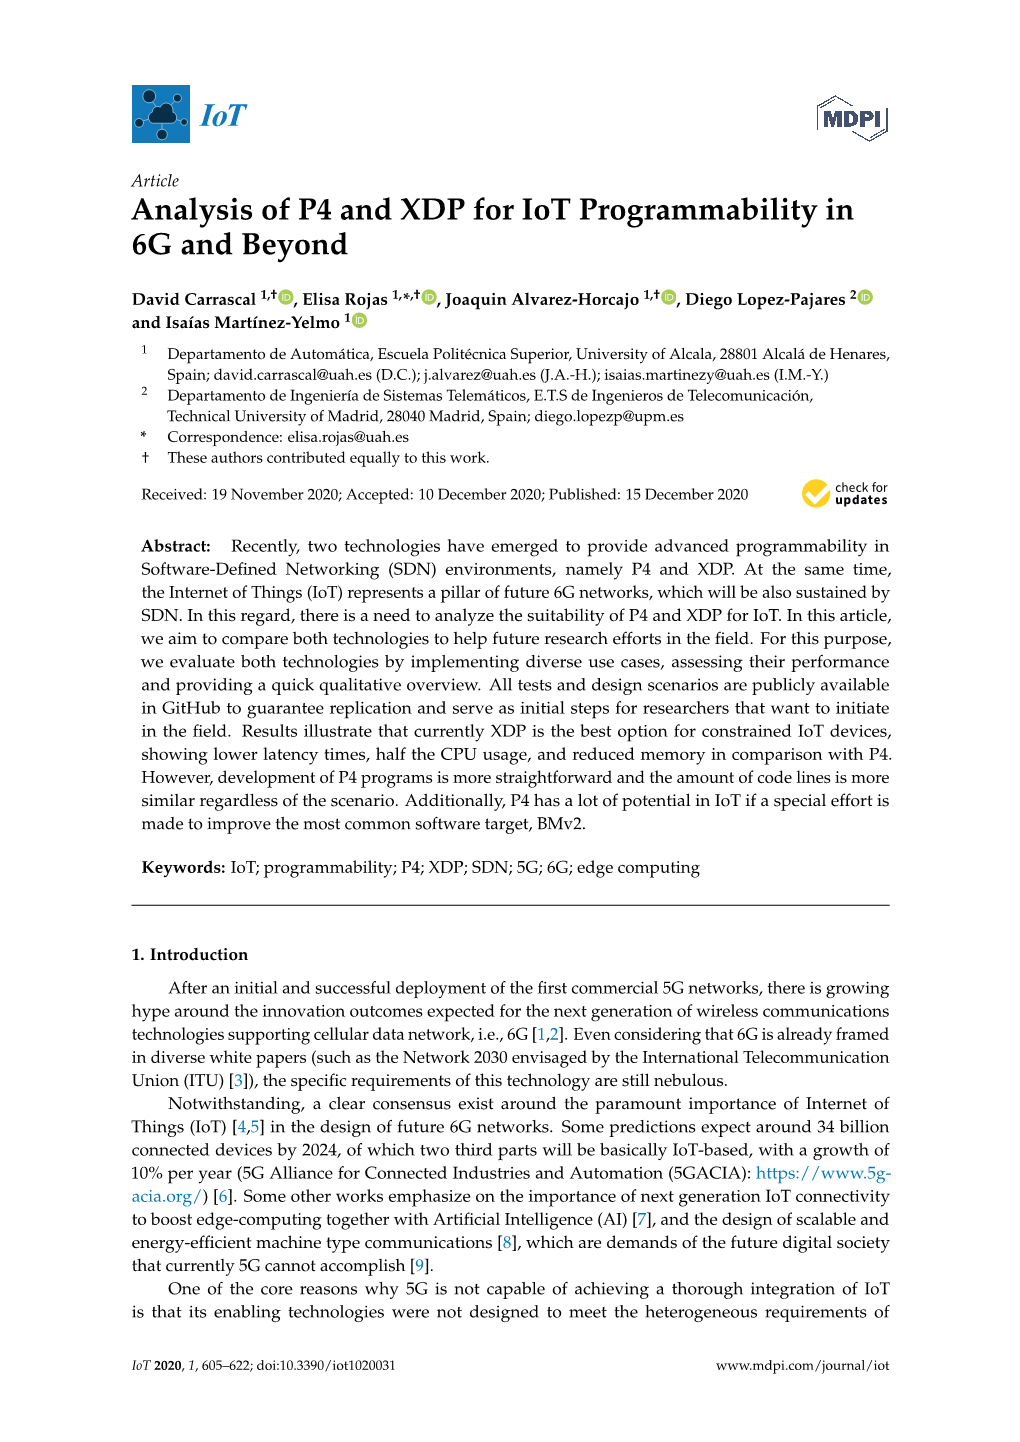 Analysis of P4 and XDP for Iot Programmability in 6G and Beyond